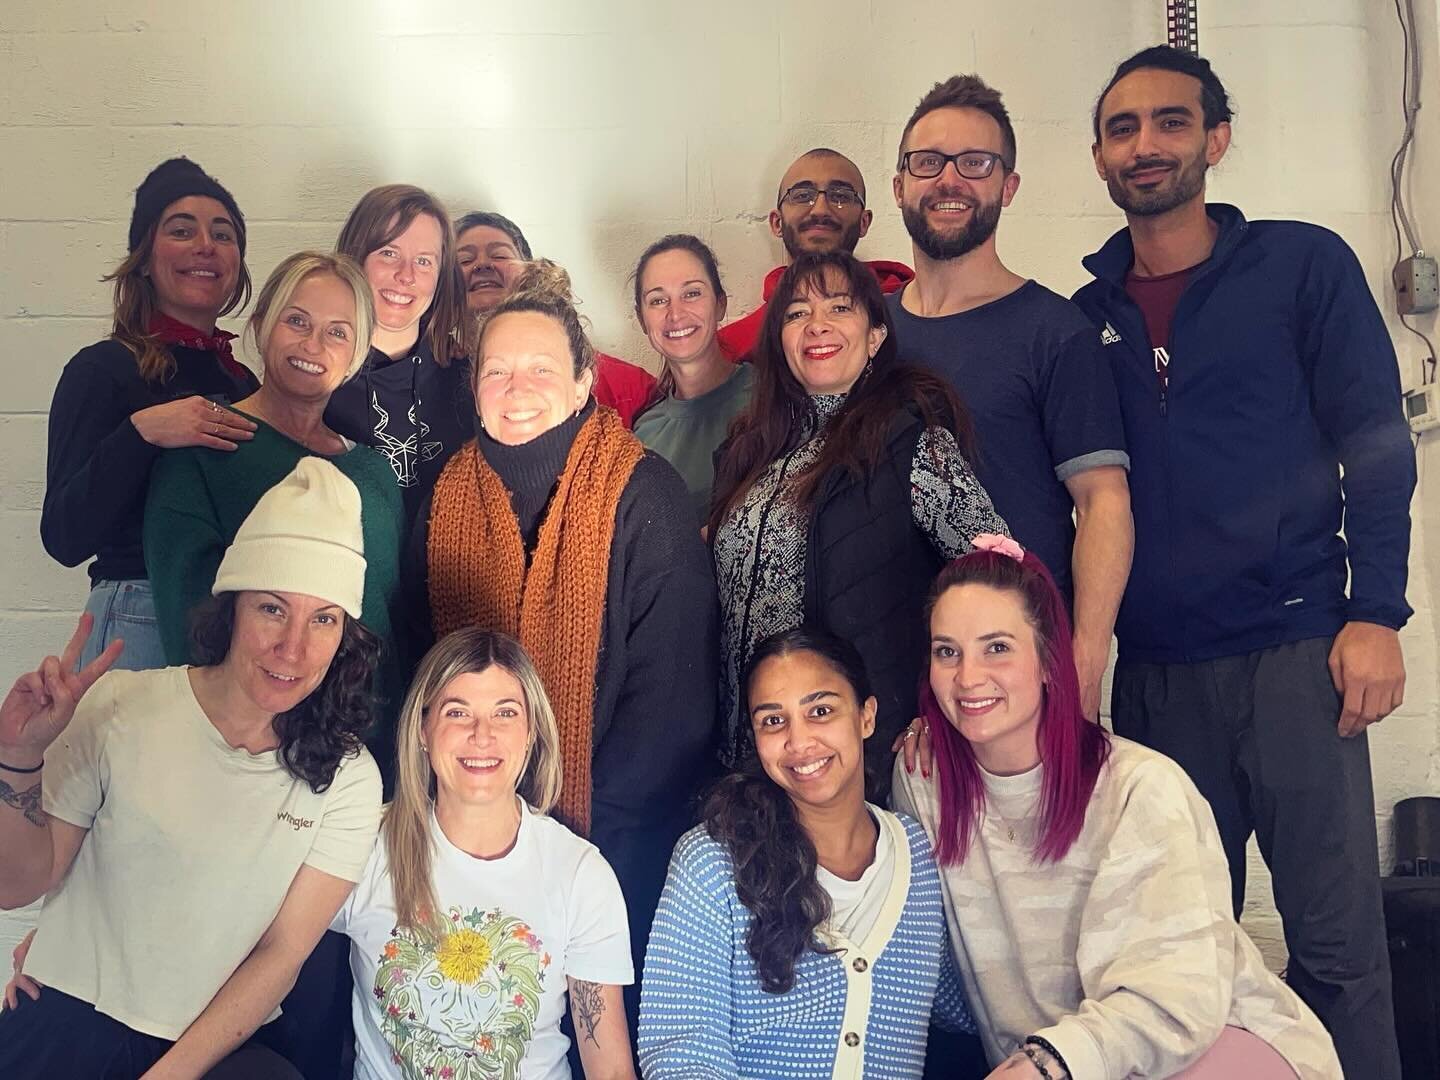 These humans right here!!! 

We are SUPPORTED 🌬️🛸🐬🌎🦅🧬⭕️🚀

Level 3 training weekend complete.  Couldn&rsquo;t be more proud of us.  What we are doing here, matters. From the inside out, we are changing worlds, backwards and forwards in time.

W